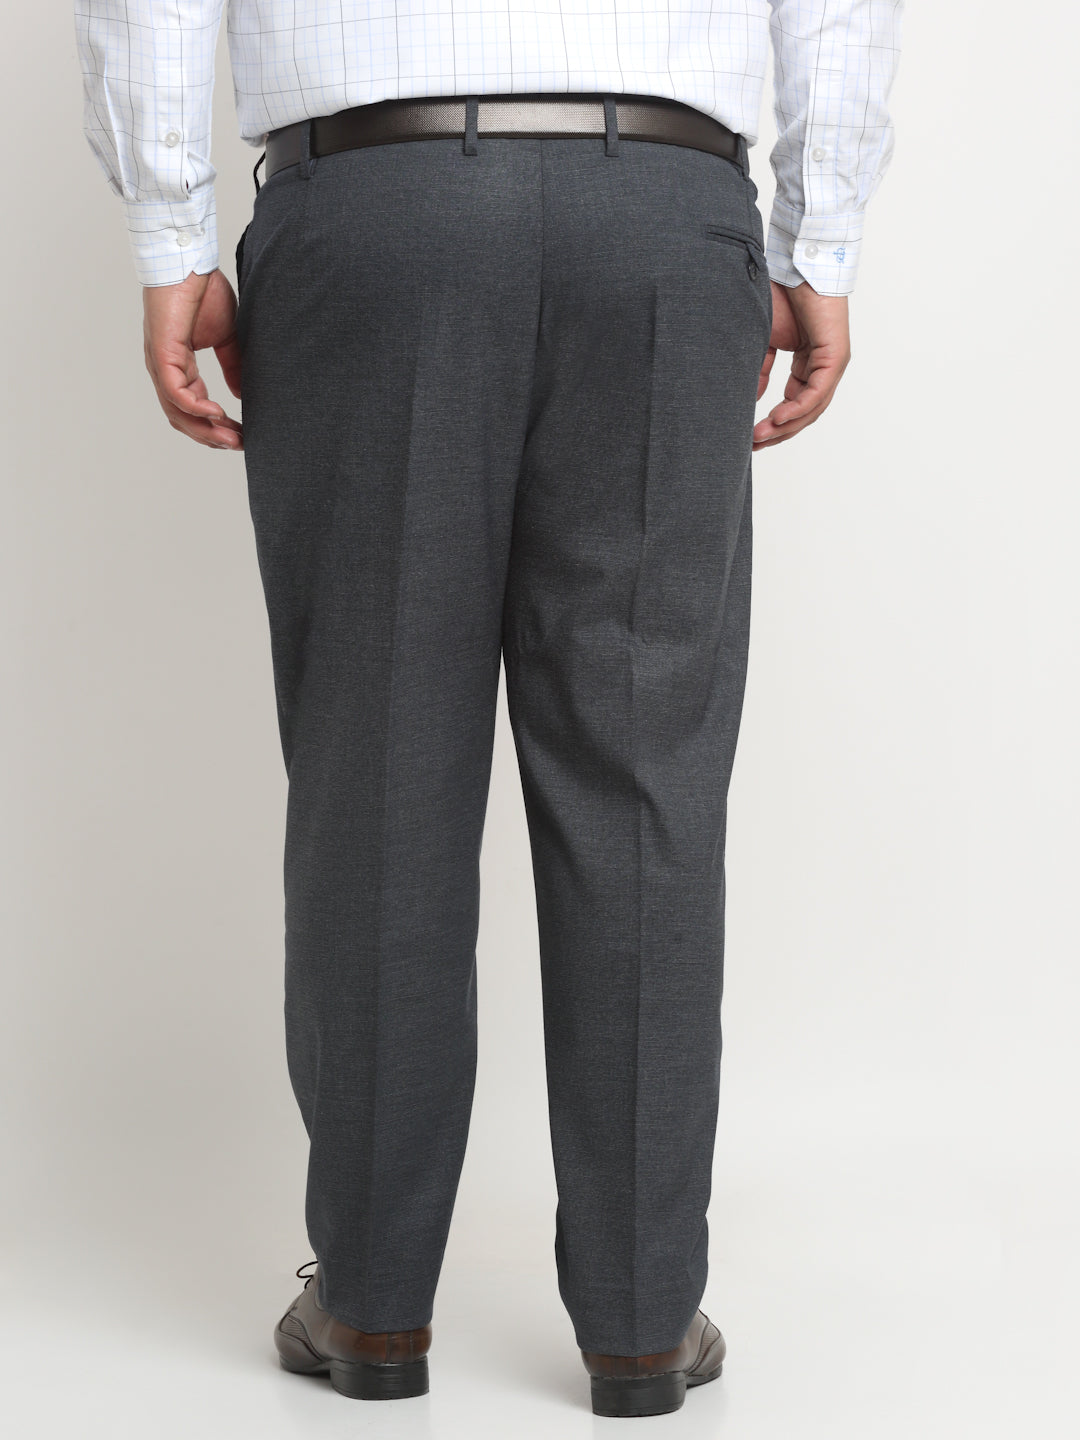 Buy Zee Gold Men's Grey Regular Straight Relaxed Fit Formal Trousers (Size  - 28) at Amazon.in